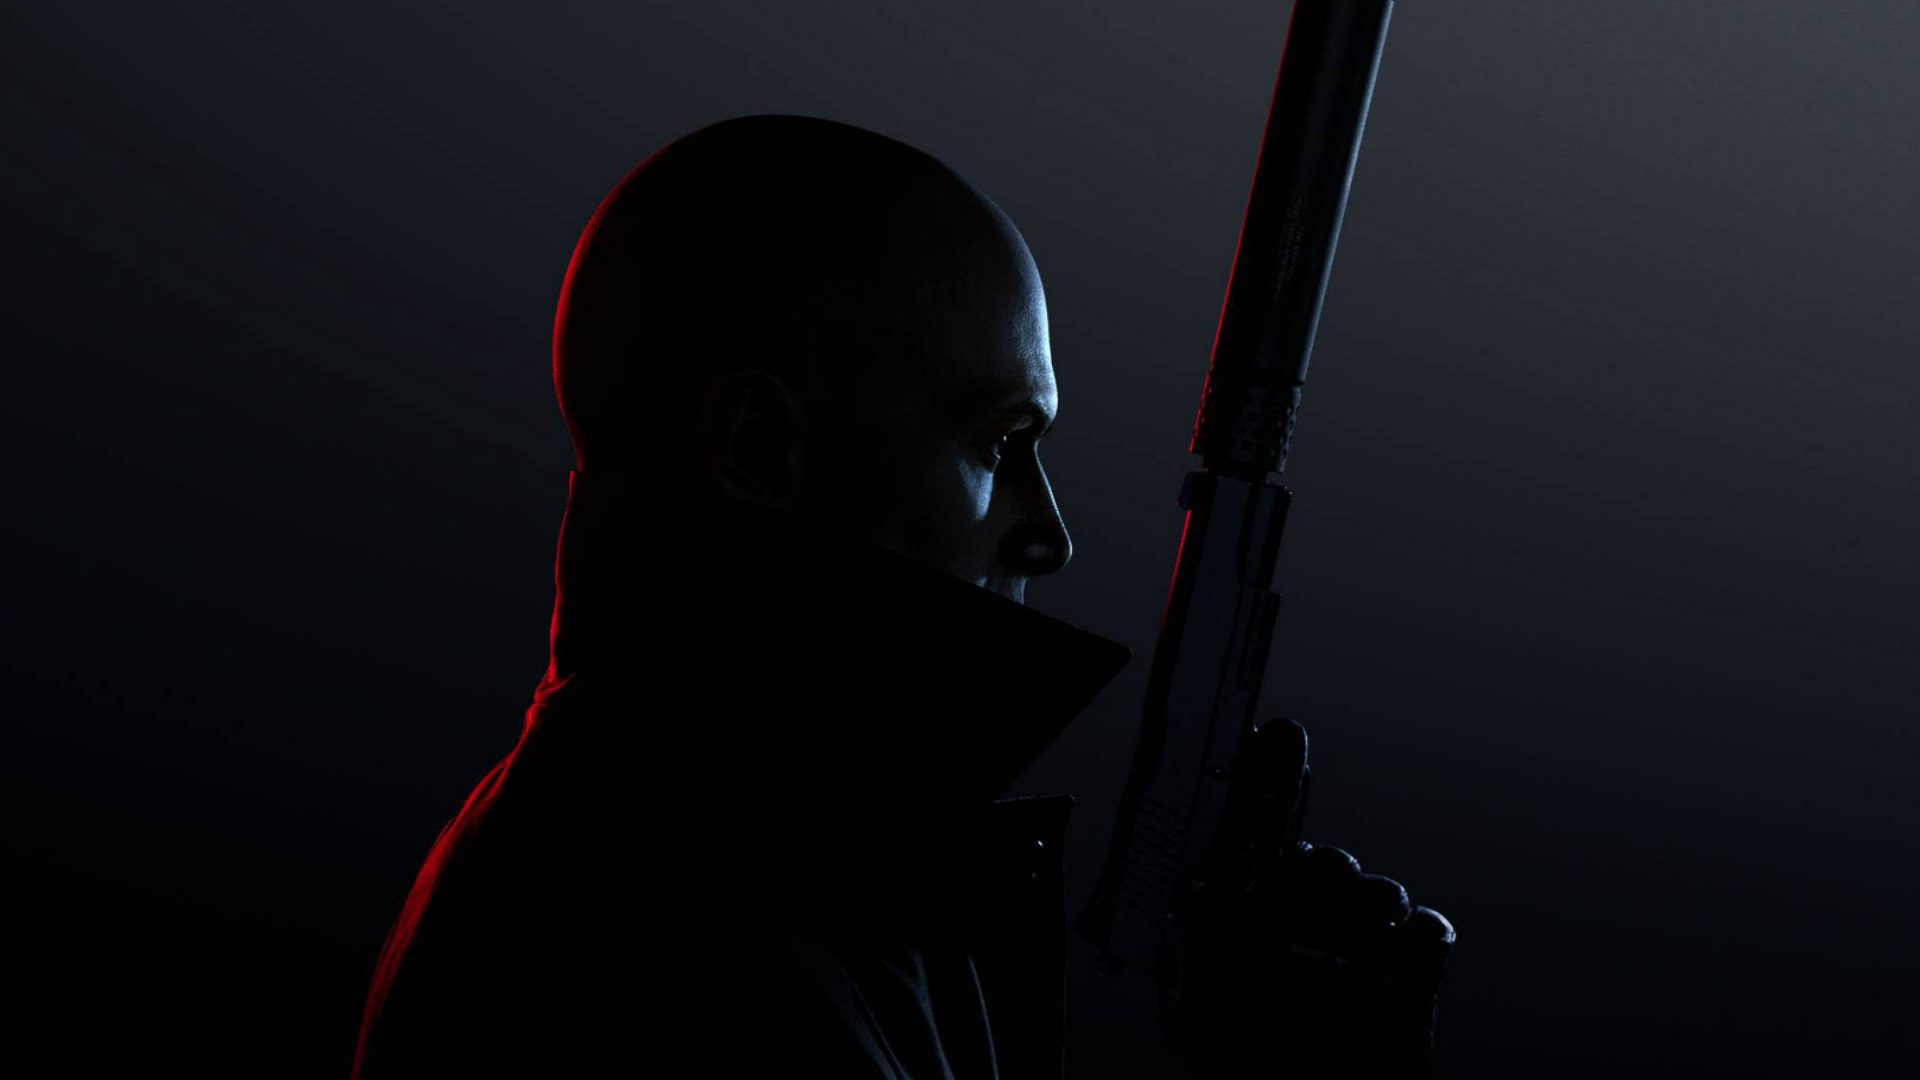 This Hitman 3 Mod allows you to play the game in first-person mode